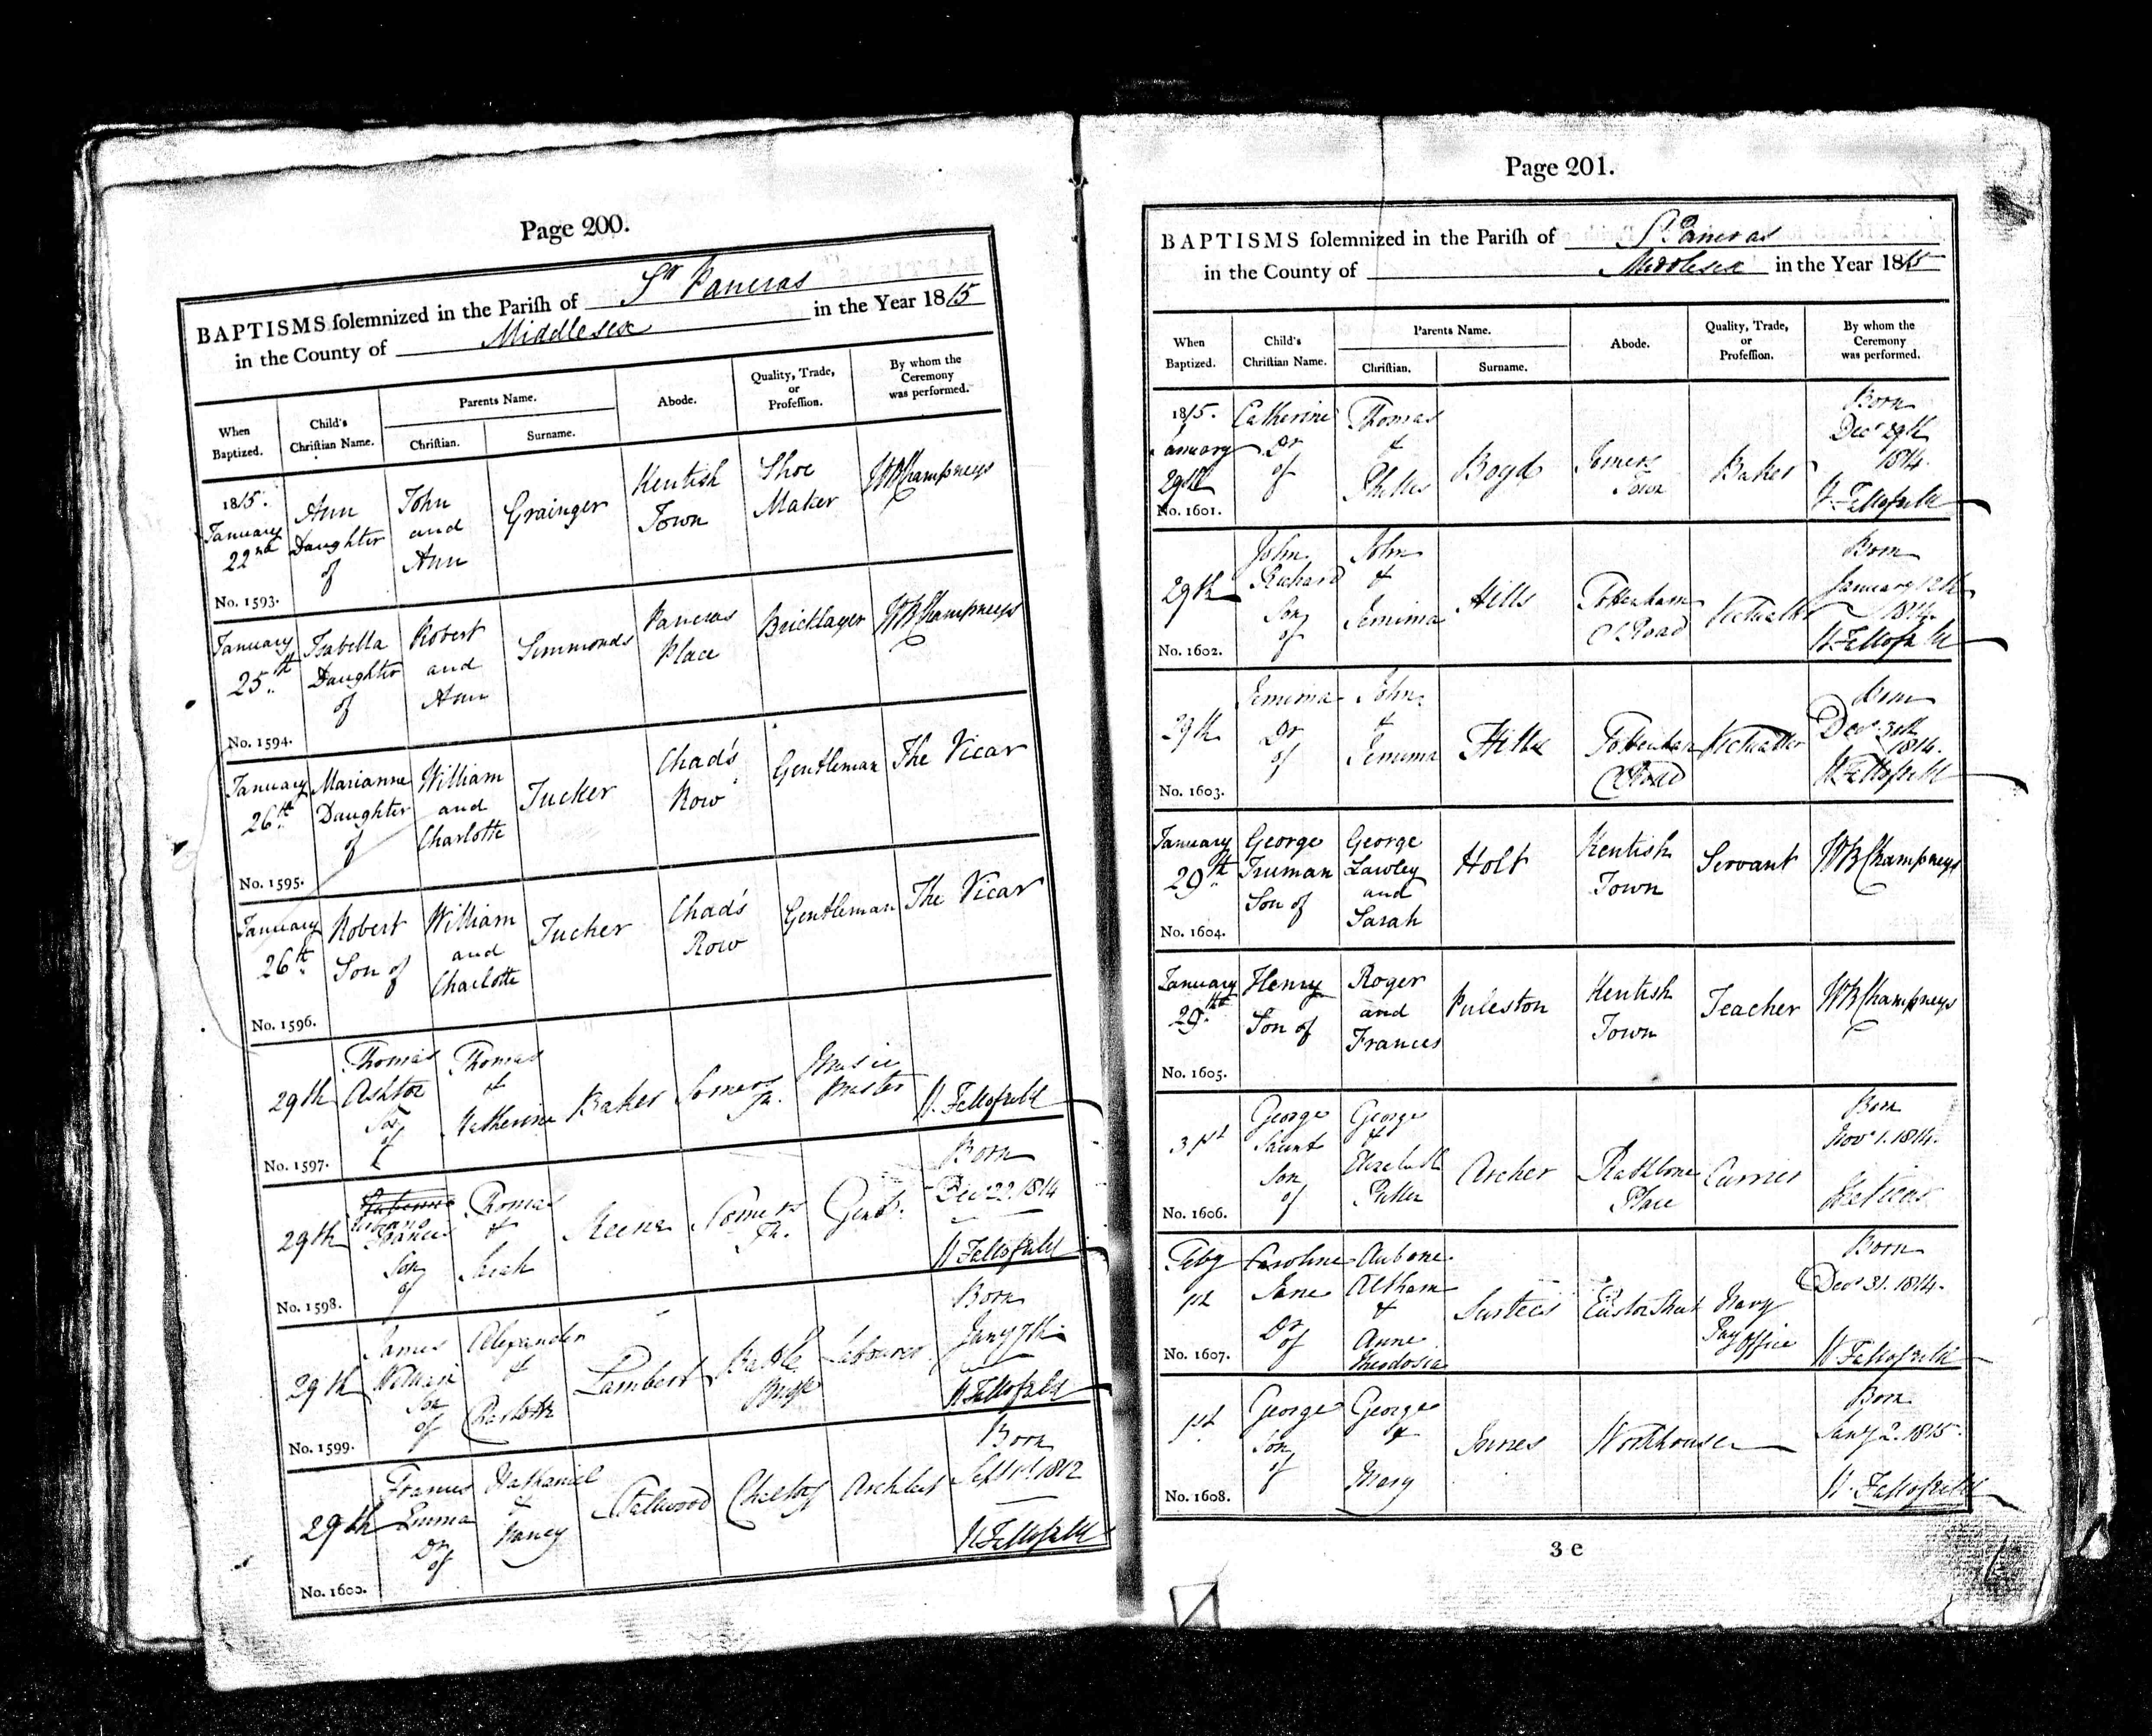 Catherine Boyd christening record 1814, from London birth and baptisms, ancestry.com